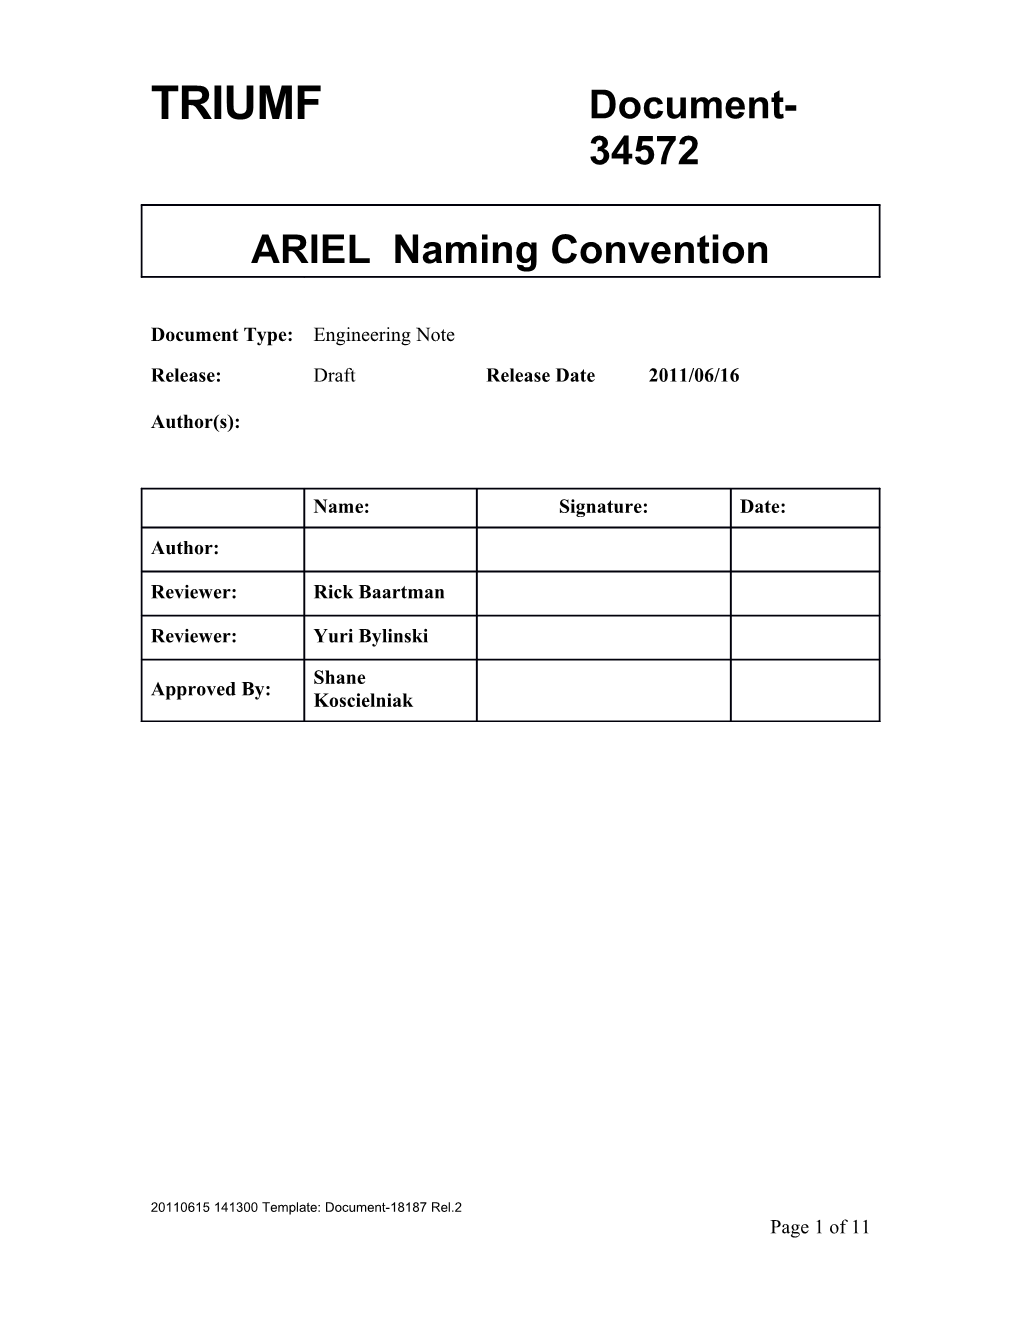 ARIEL Naming Convention